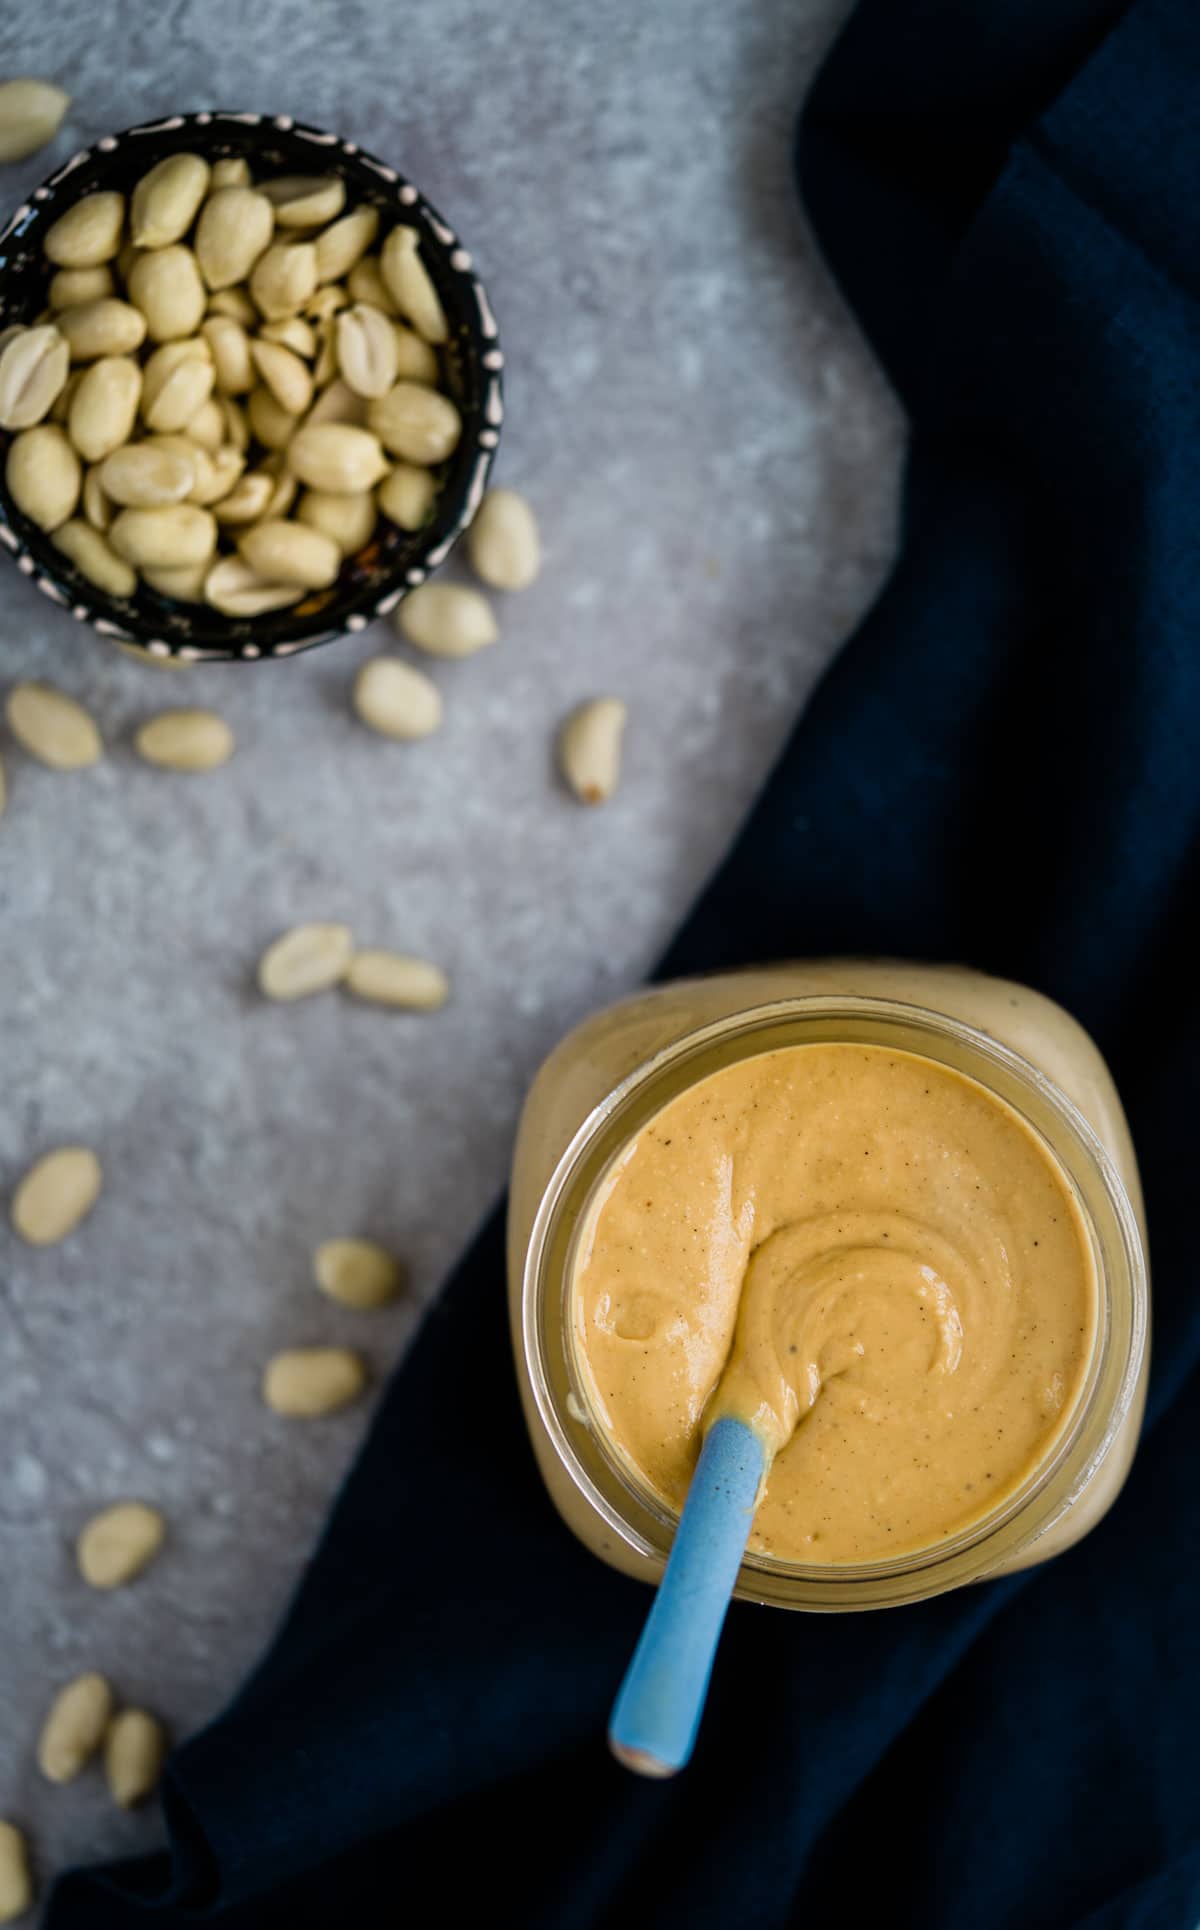 Homemade peanut butter in a jar with a blue spoon and a side of roasted peanuts in a small bowl